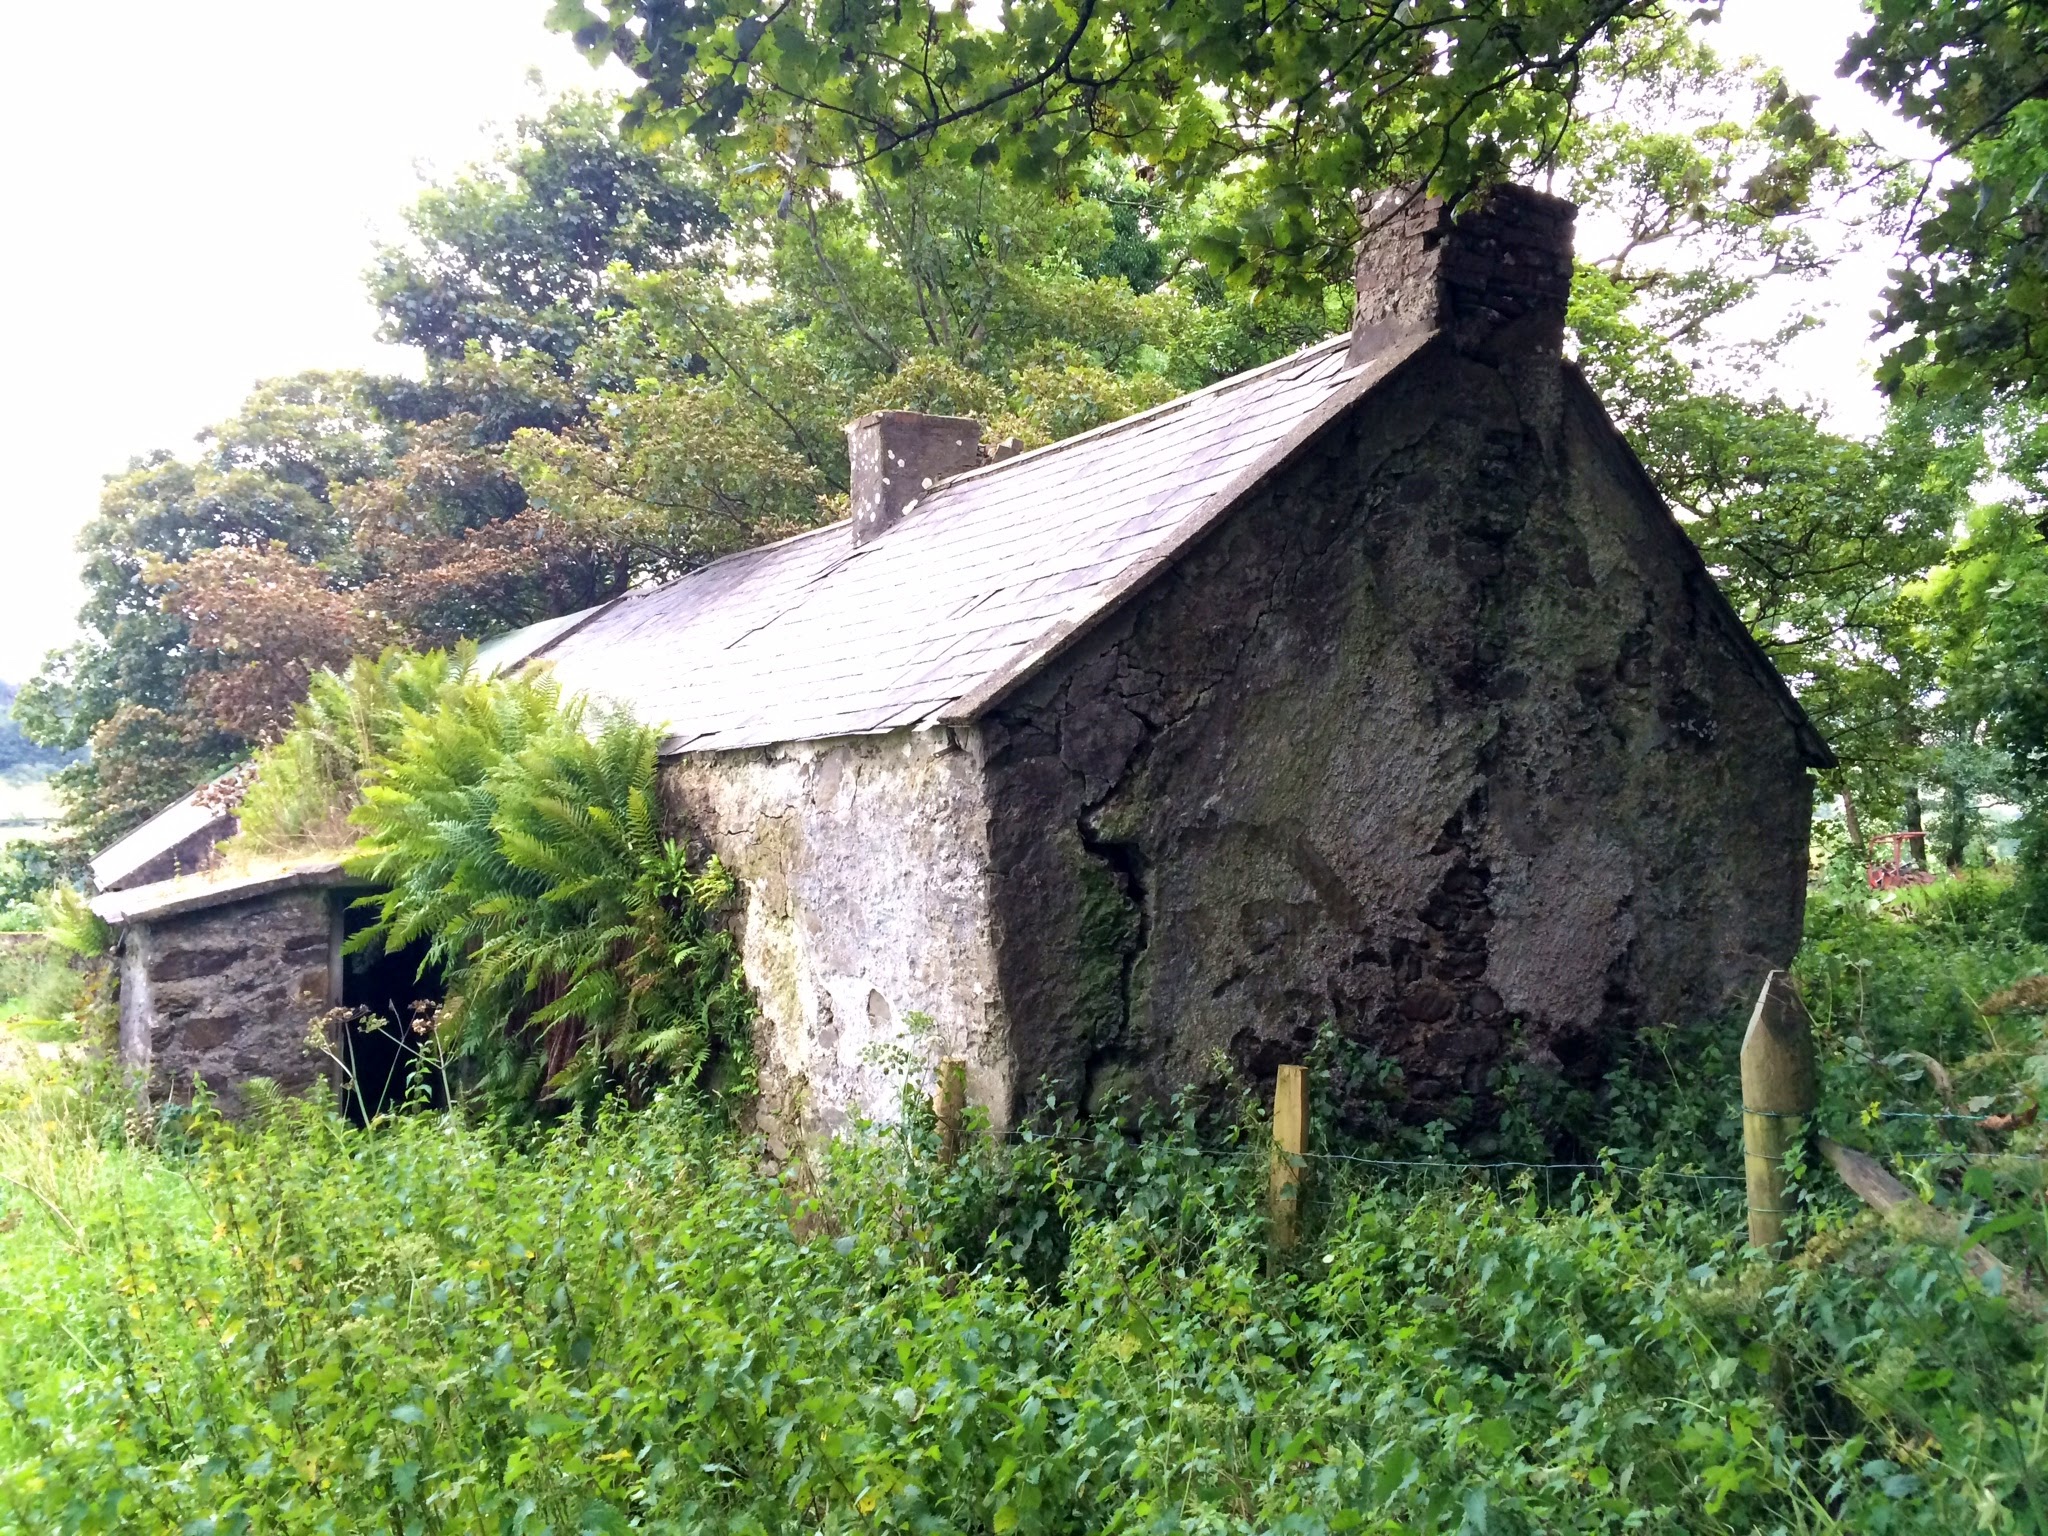 Derelict farm, Clare, Glenshesk, Ballycastle where John Henry was brought up. Photo - Niall McCaughan